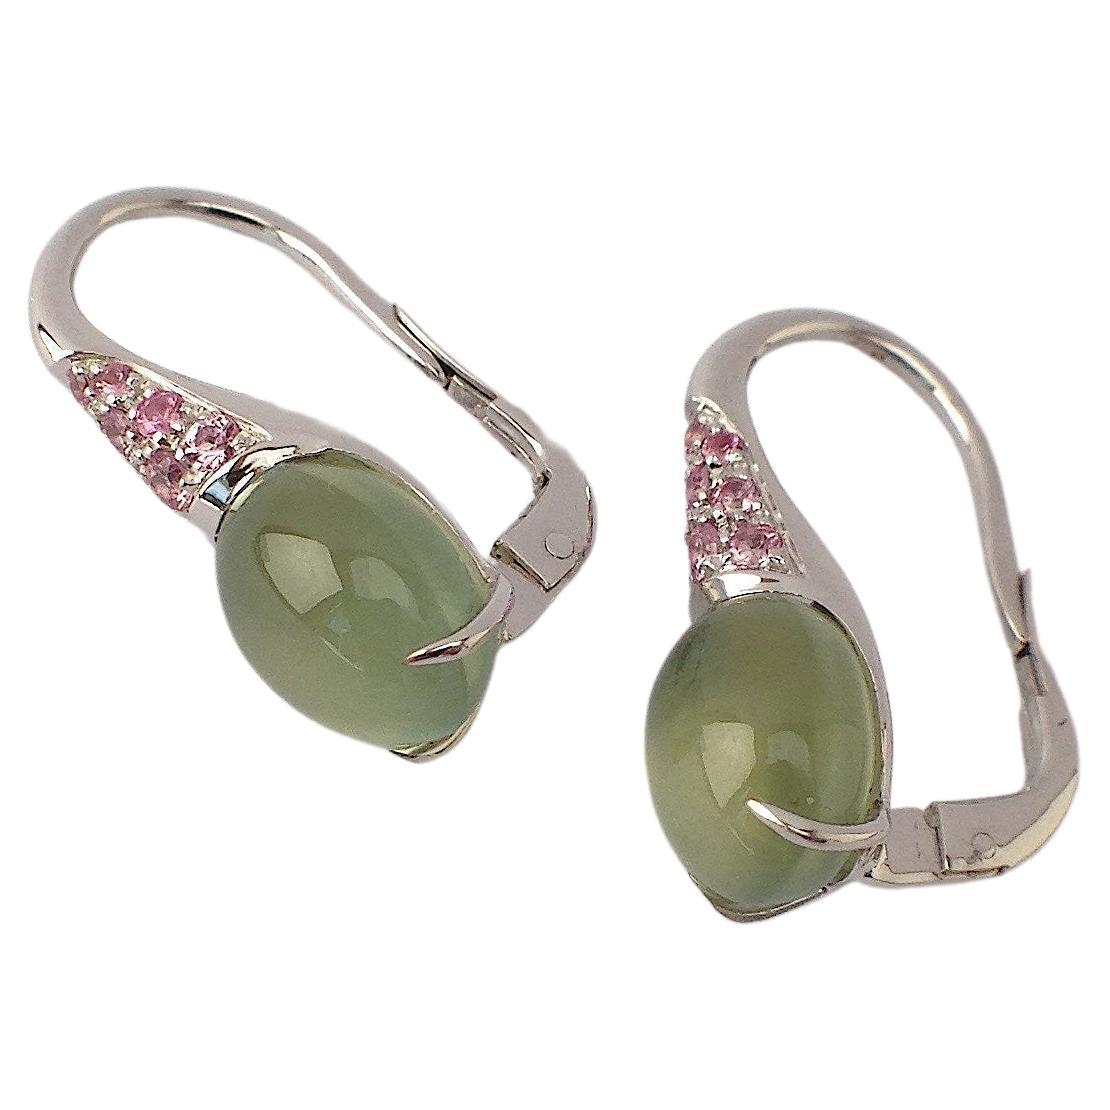 Gemstone Pink Sapphire Prehnite 18Kt Gold Earrings Made in Italy
These earrings have two prehnite cabochon cut 8x10 mm and ct 0.39 pink sapphires with lever spring clips in white gold. 
The cabochon are not standard cut, but they are more rounded